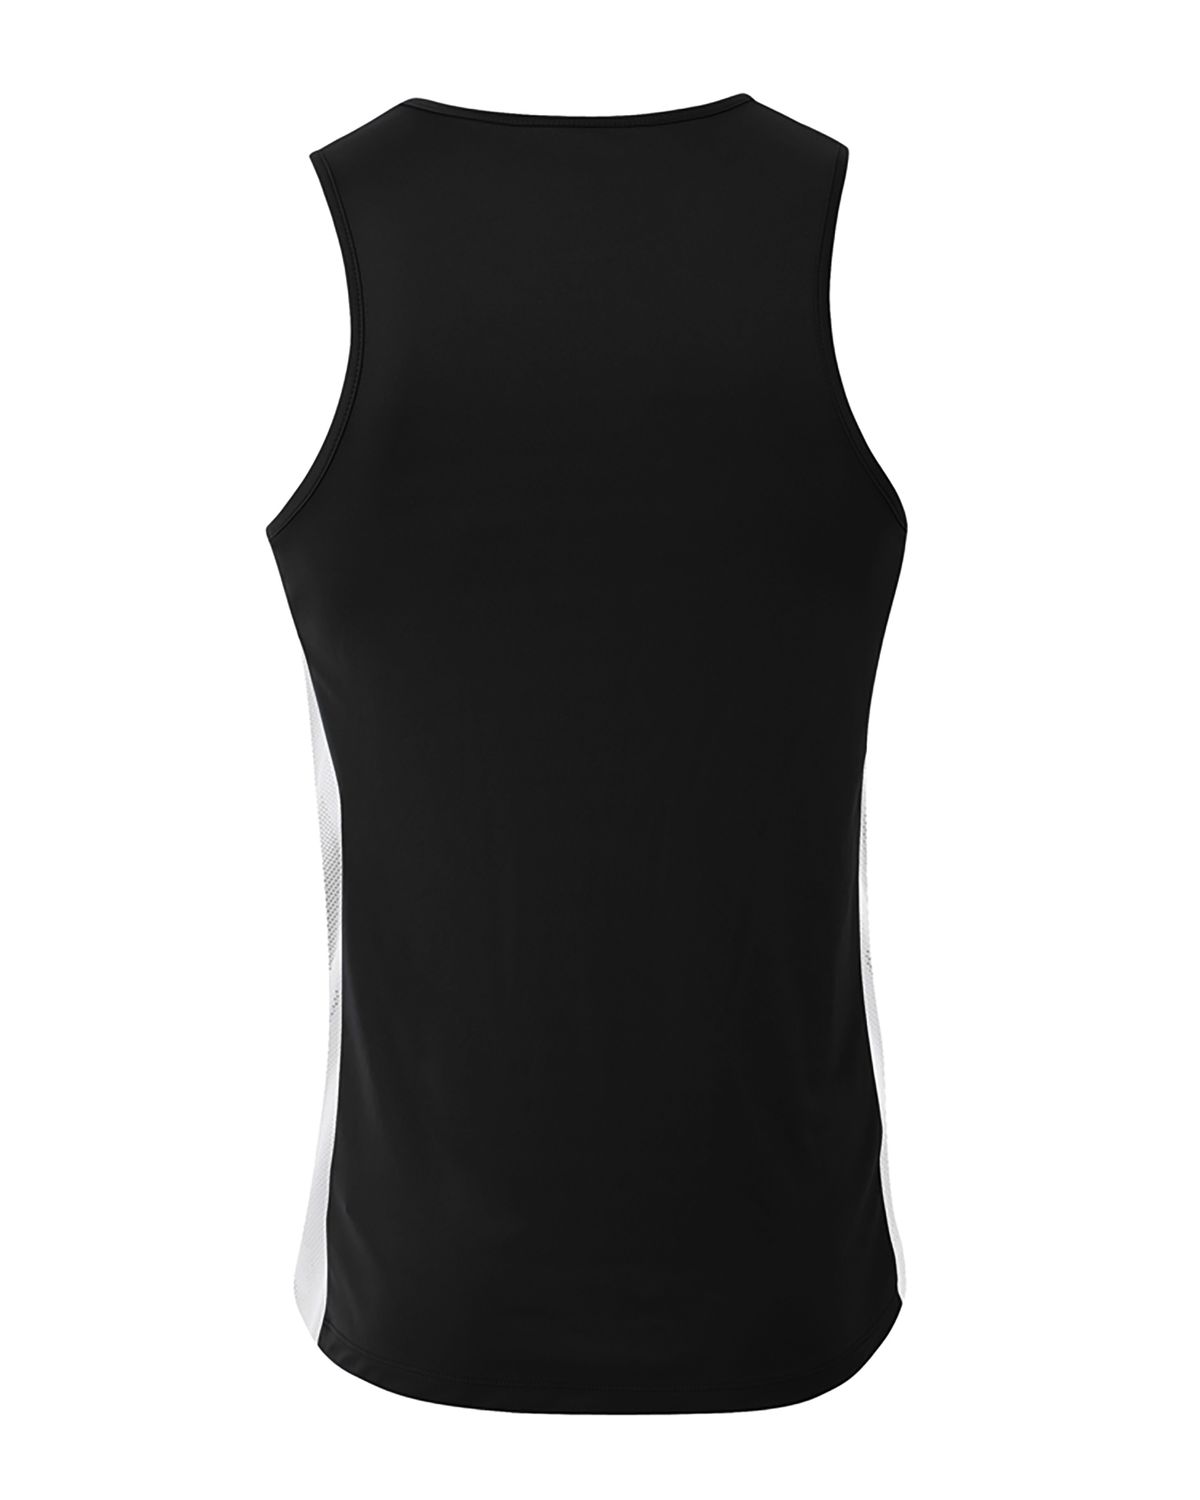 'A4 N2009 Pacer Singlet'